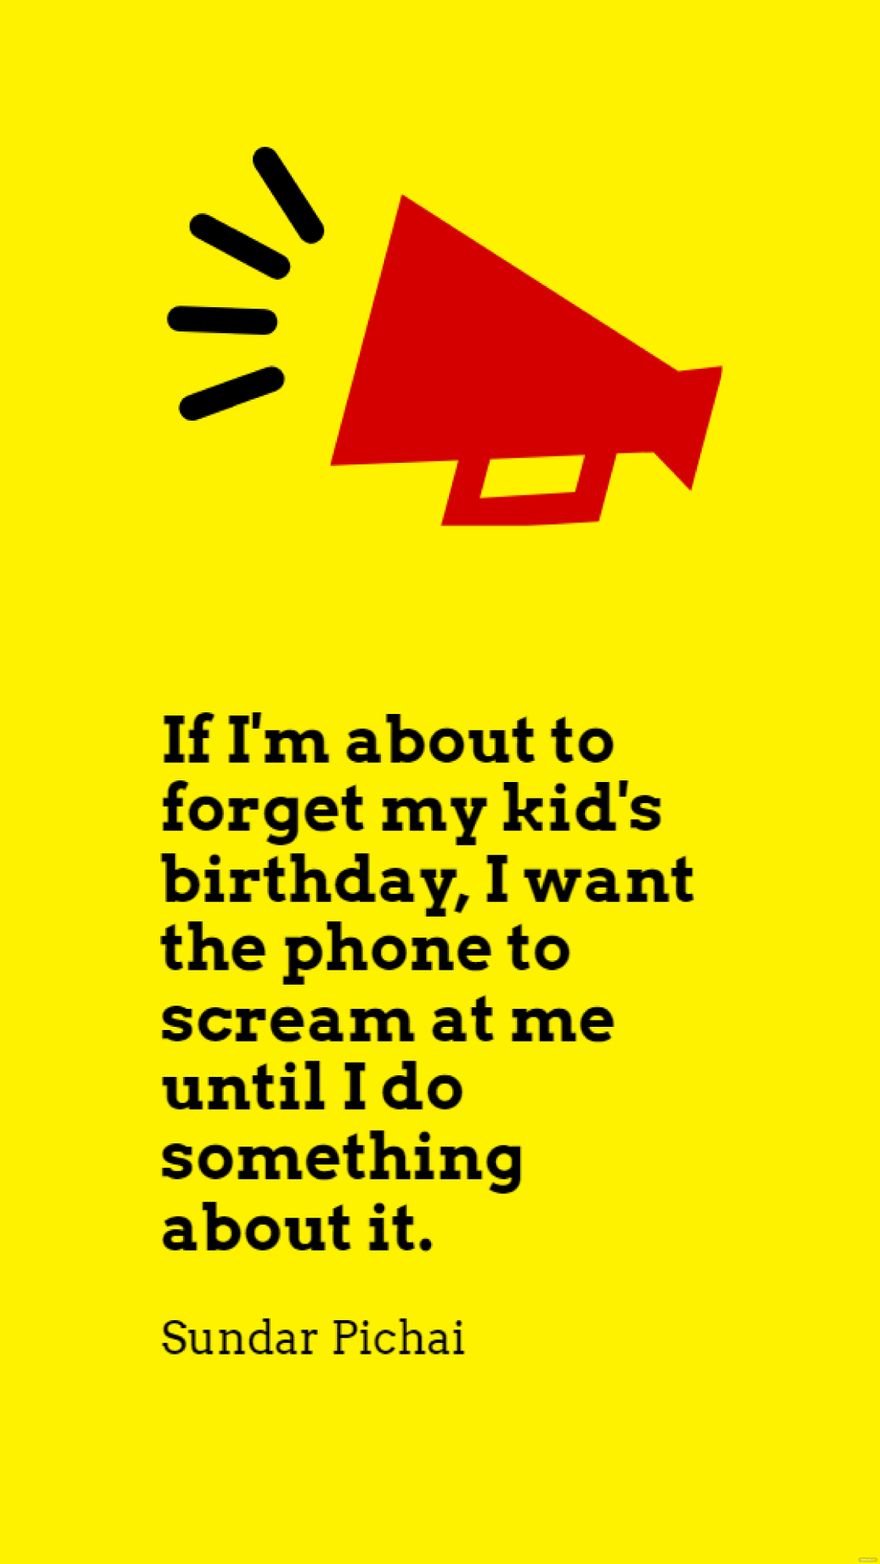 Sundar Pichai - If I'm about to forget my kid's birthday, I want the phone to scream at me until I do something about it.